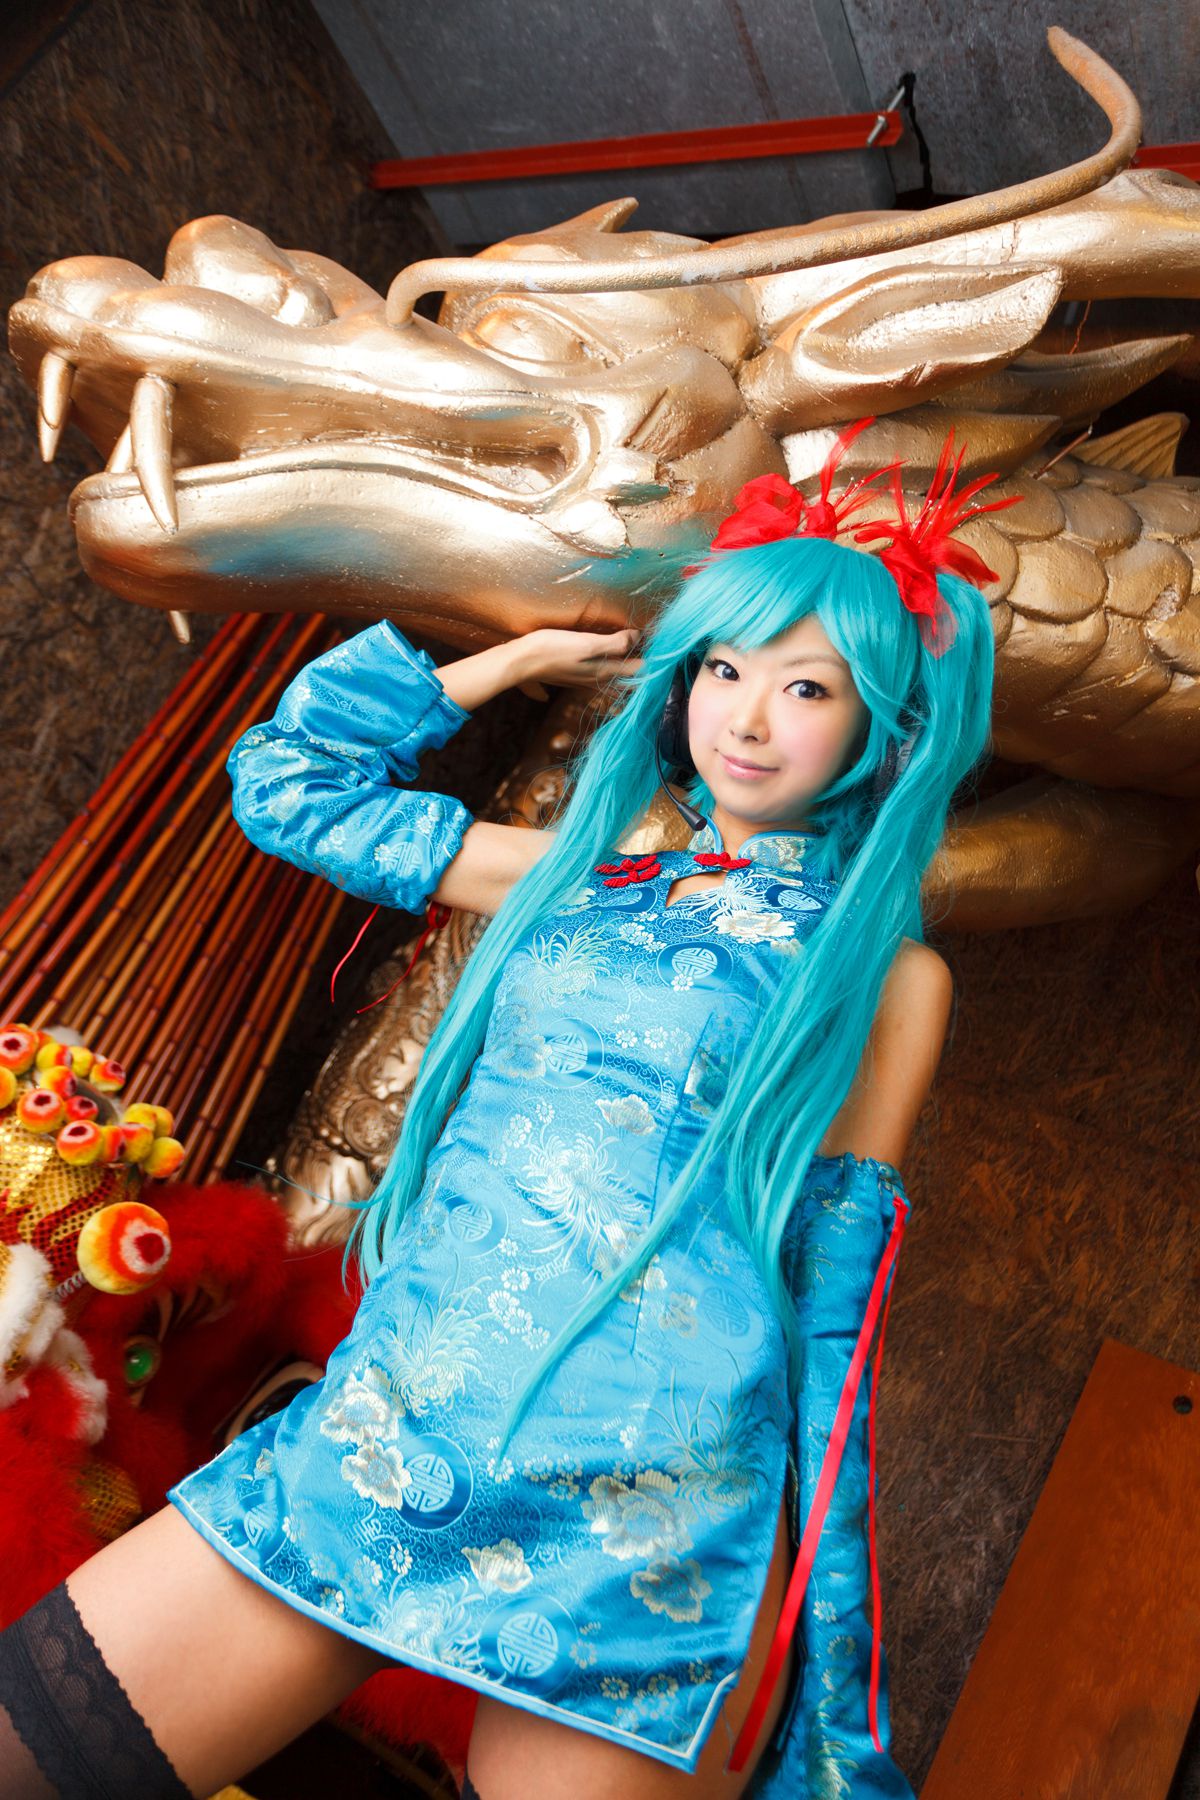 taotuhome[Cosplay] Necoco as Hatsune Miku from Vocaloid 套图第29张